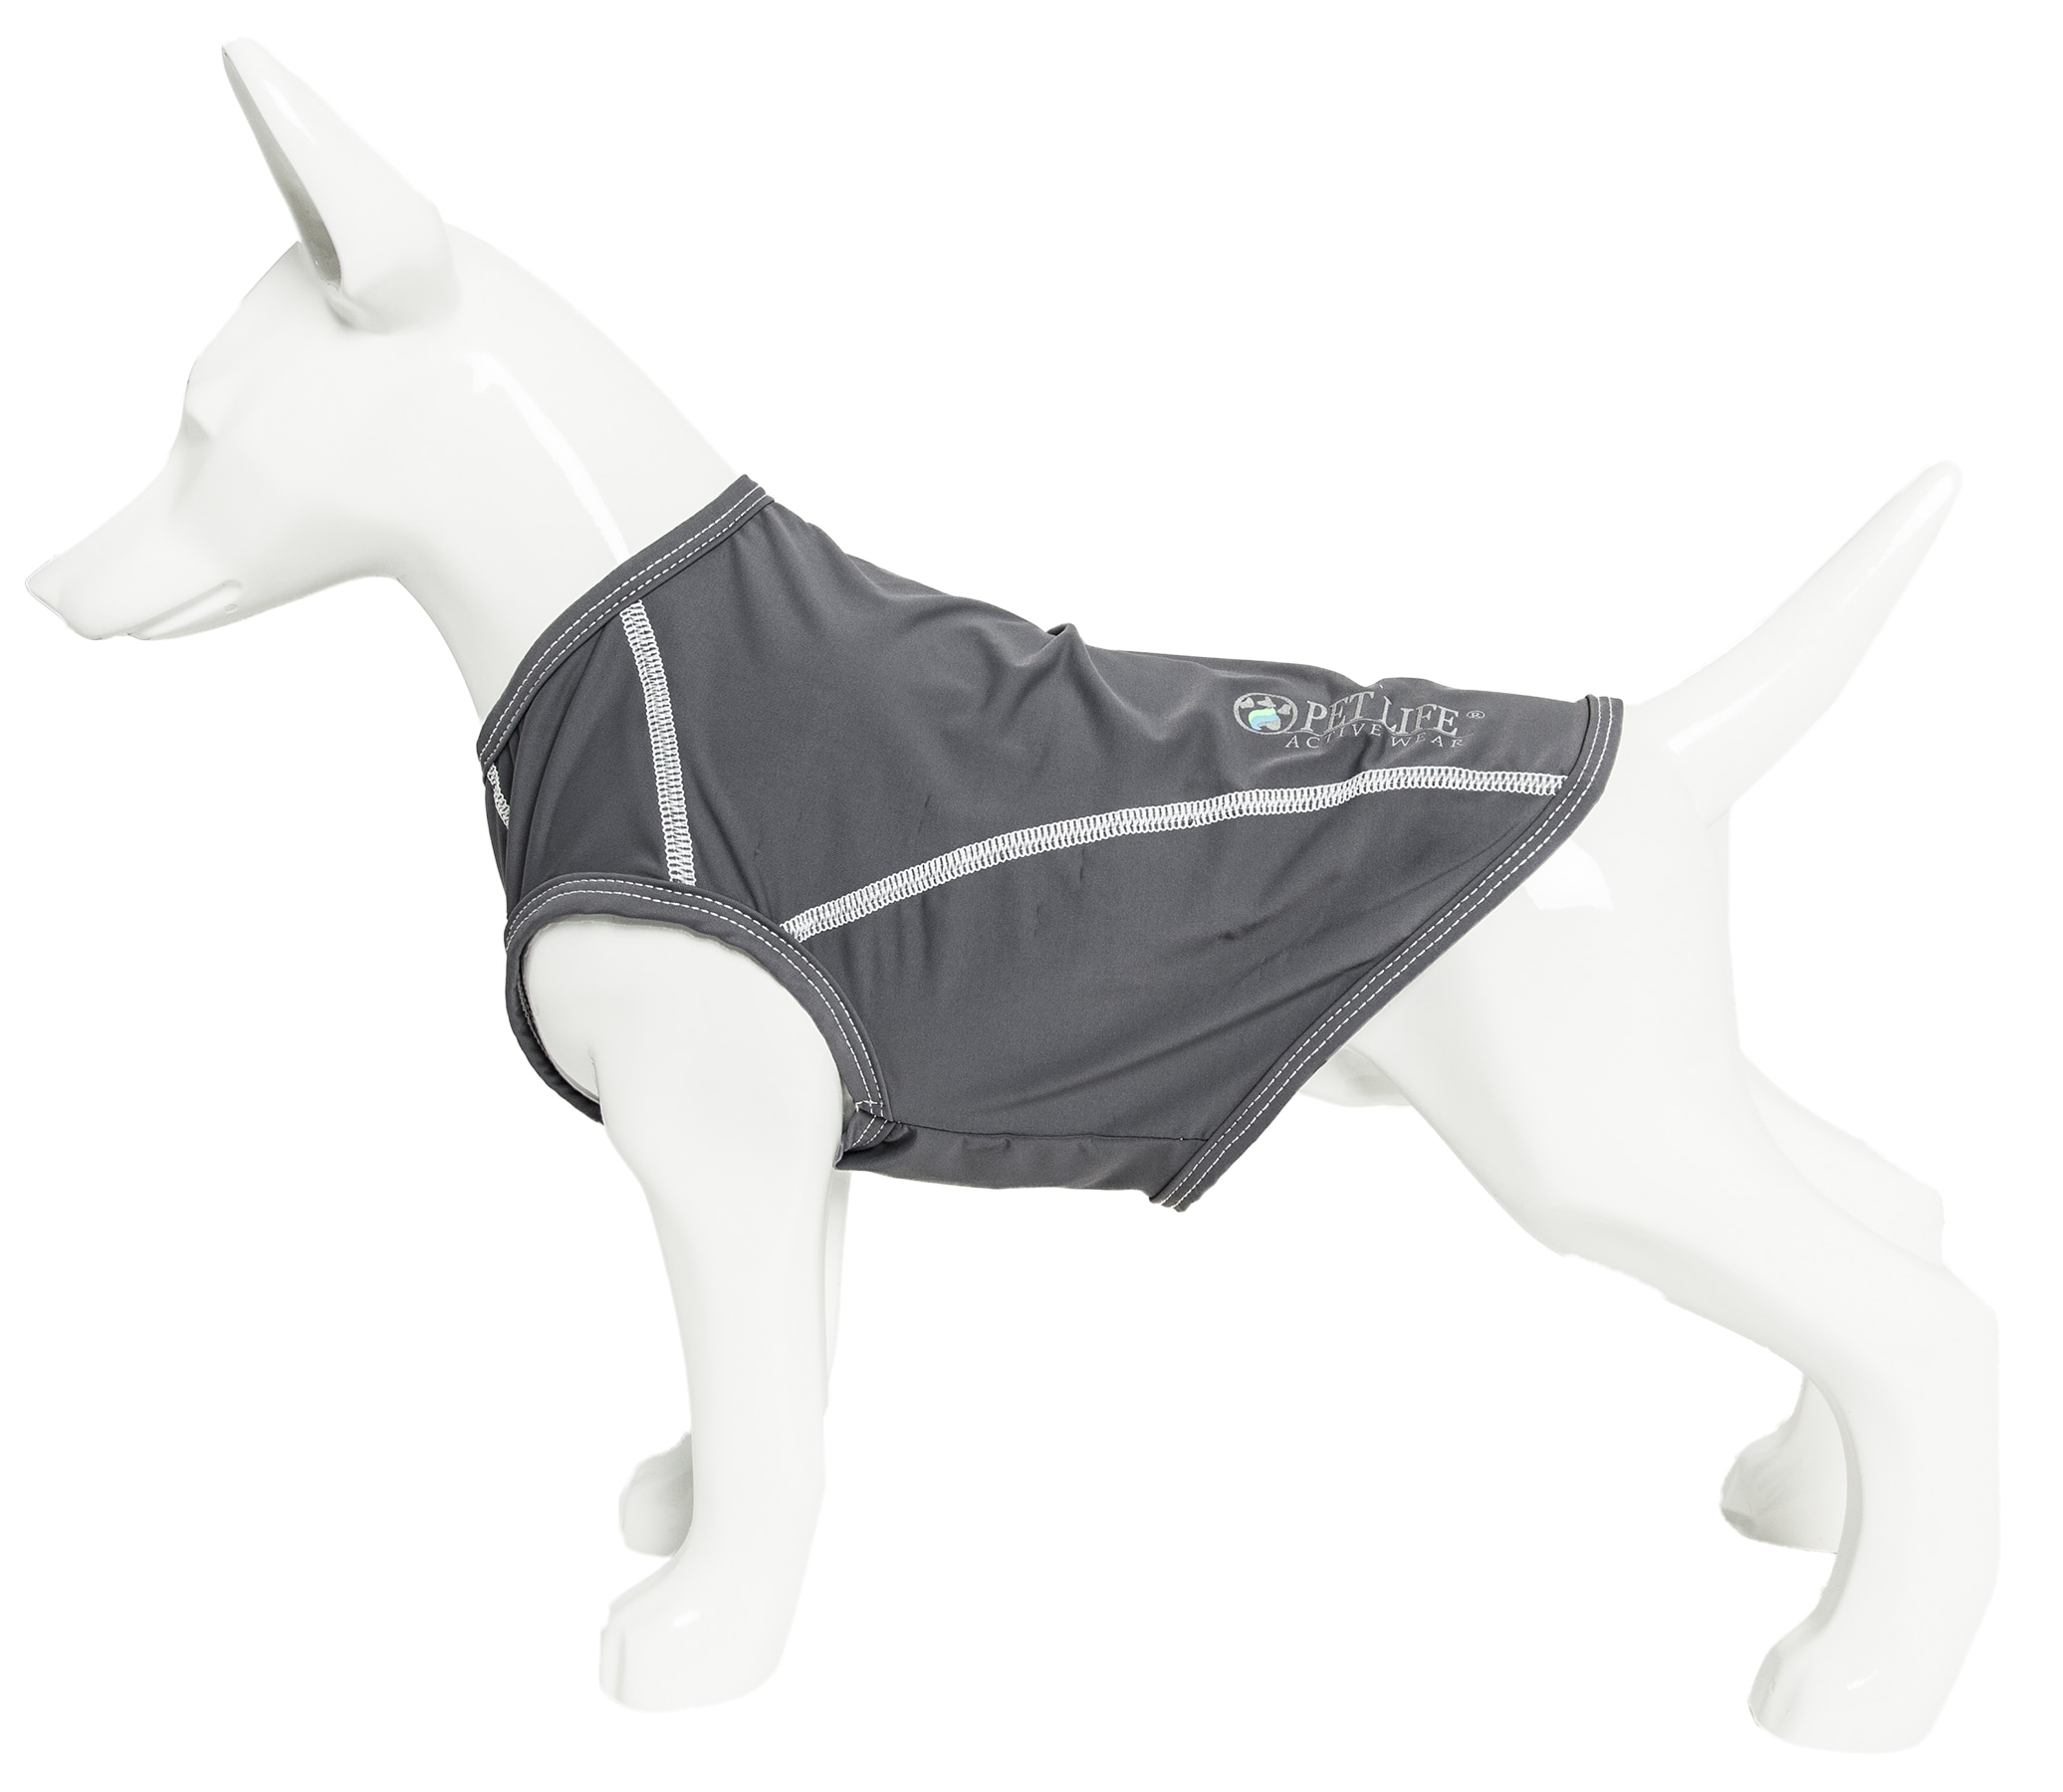 People Pleaser Dog Tank; Pre-Shrunk Cotton Pet Muscle Tank; Medium (22  Chest); Cute Dog Accessories with Eye-Catching Design